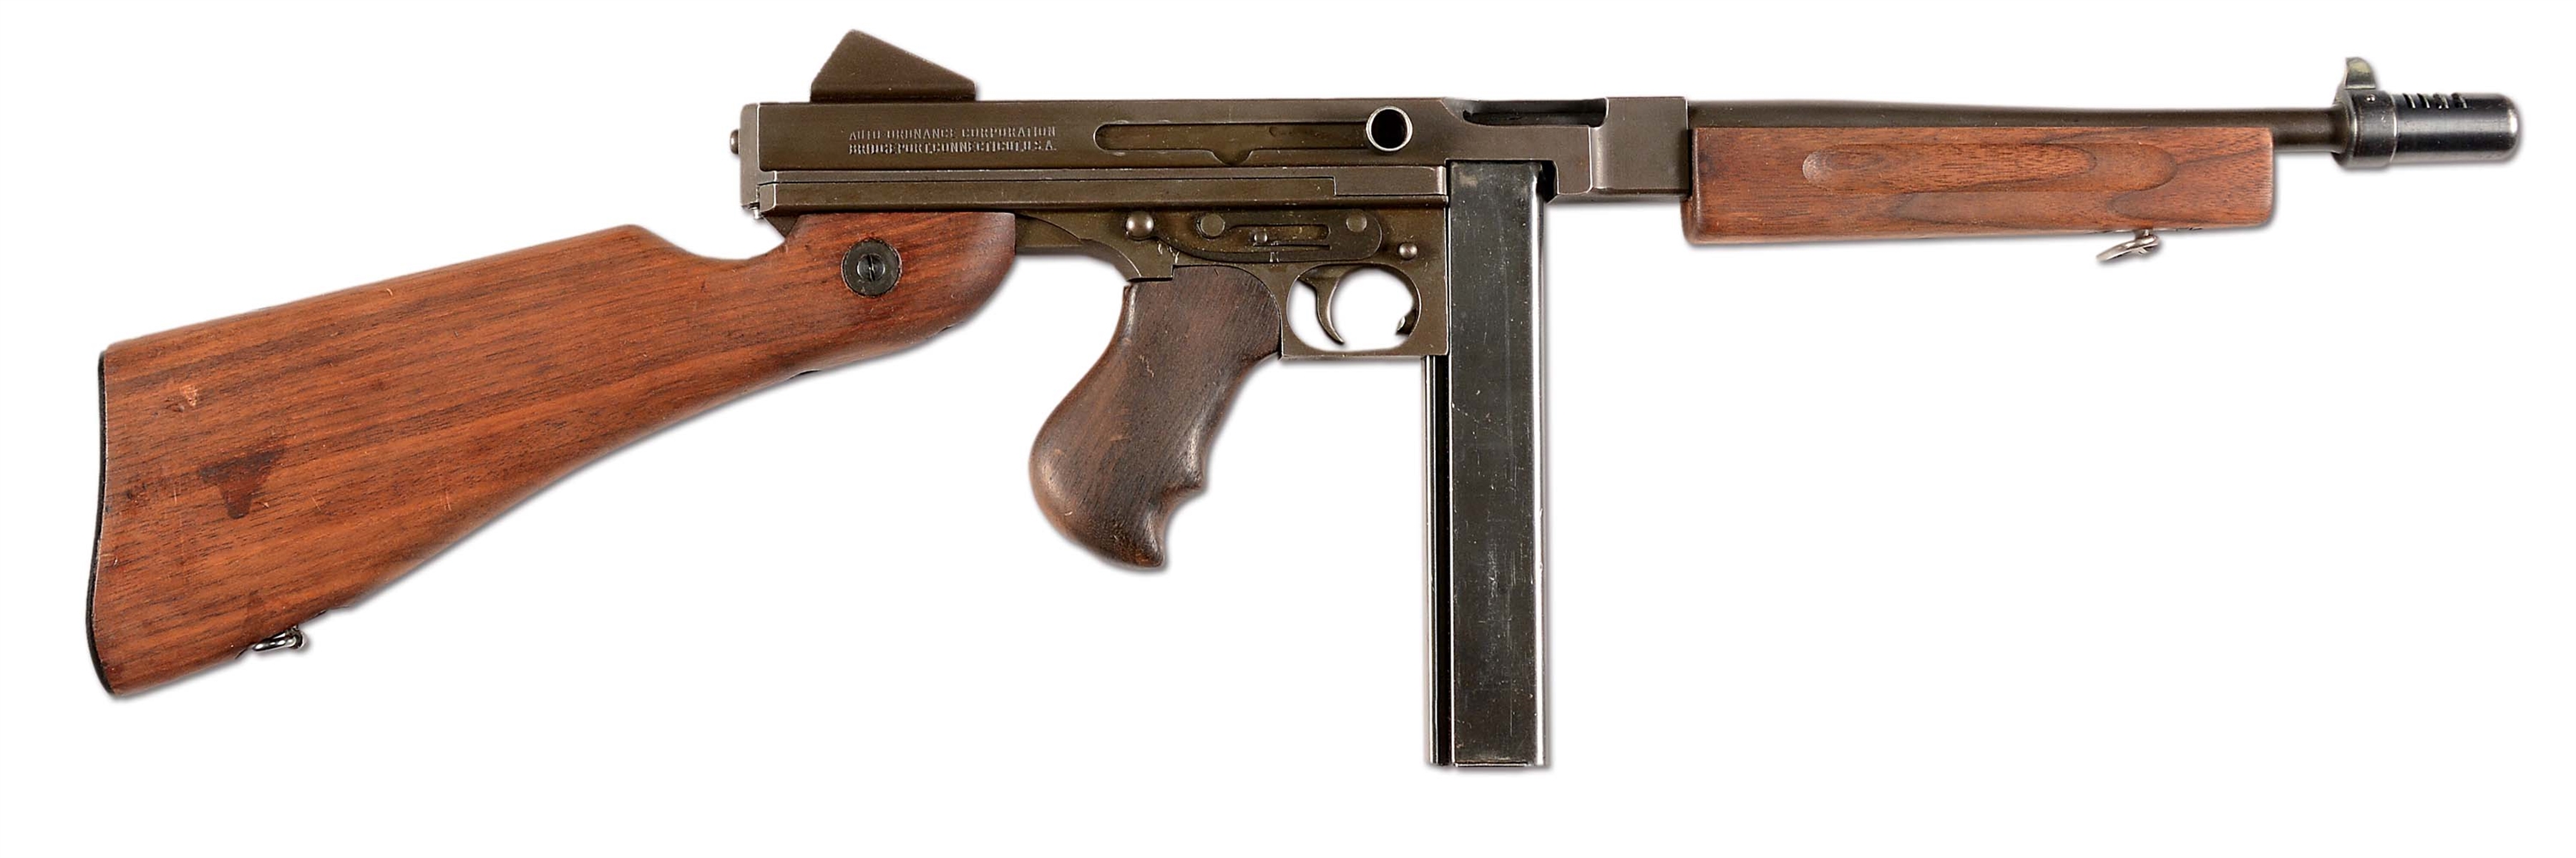 (N) OUTSTANDING WWII ORDNANCE MARKED BRIDGEPORT M1A1 THOMPSON MACHINE GUN WITH ACCESSORIES (CURIO AND RELIC).